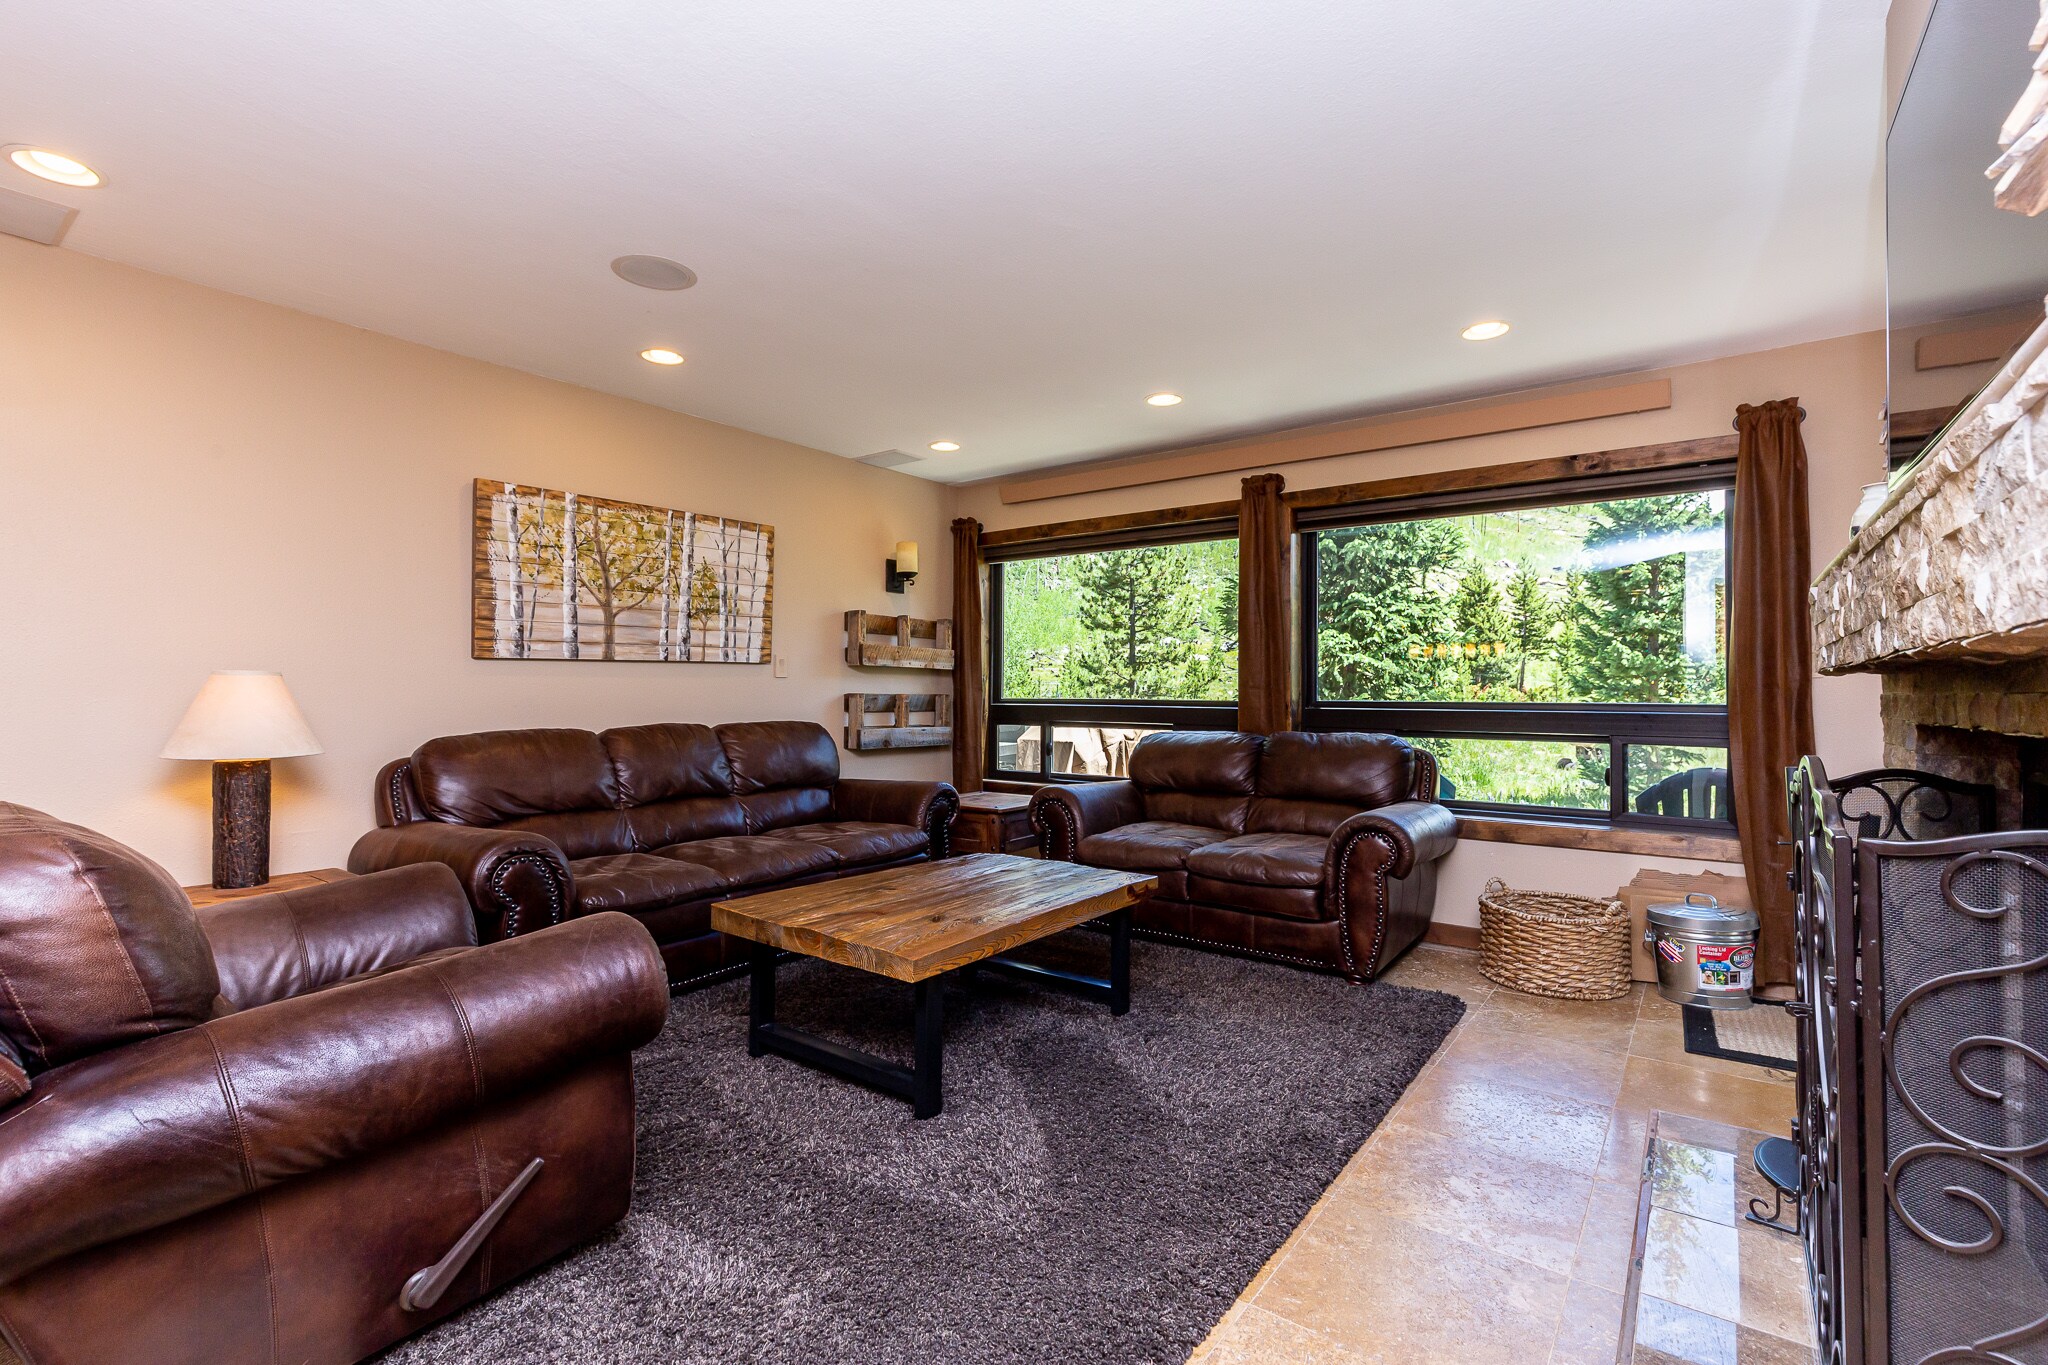 The living area features a wood-burning fireplace, a mounted flat-screen TV, and ample seating.